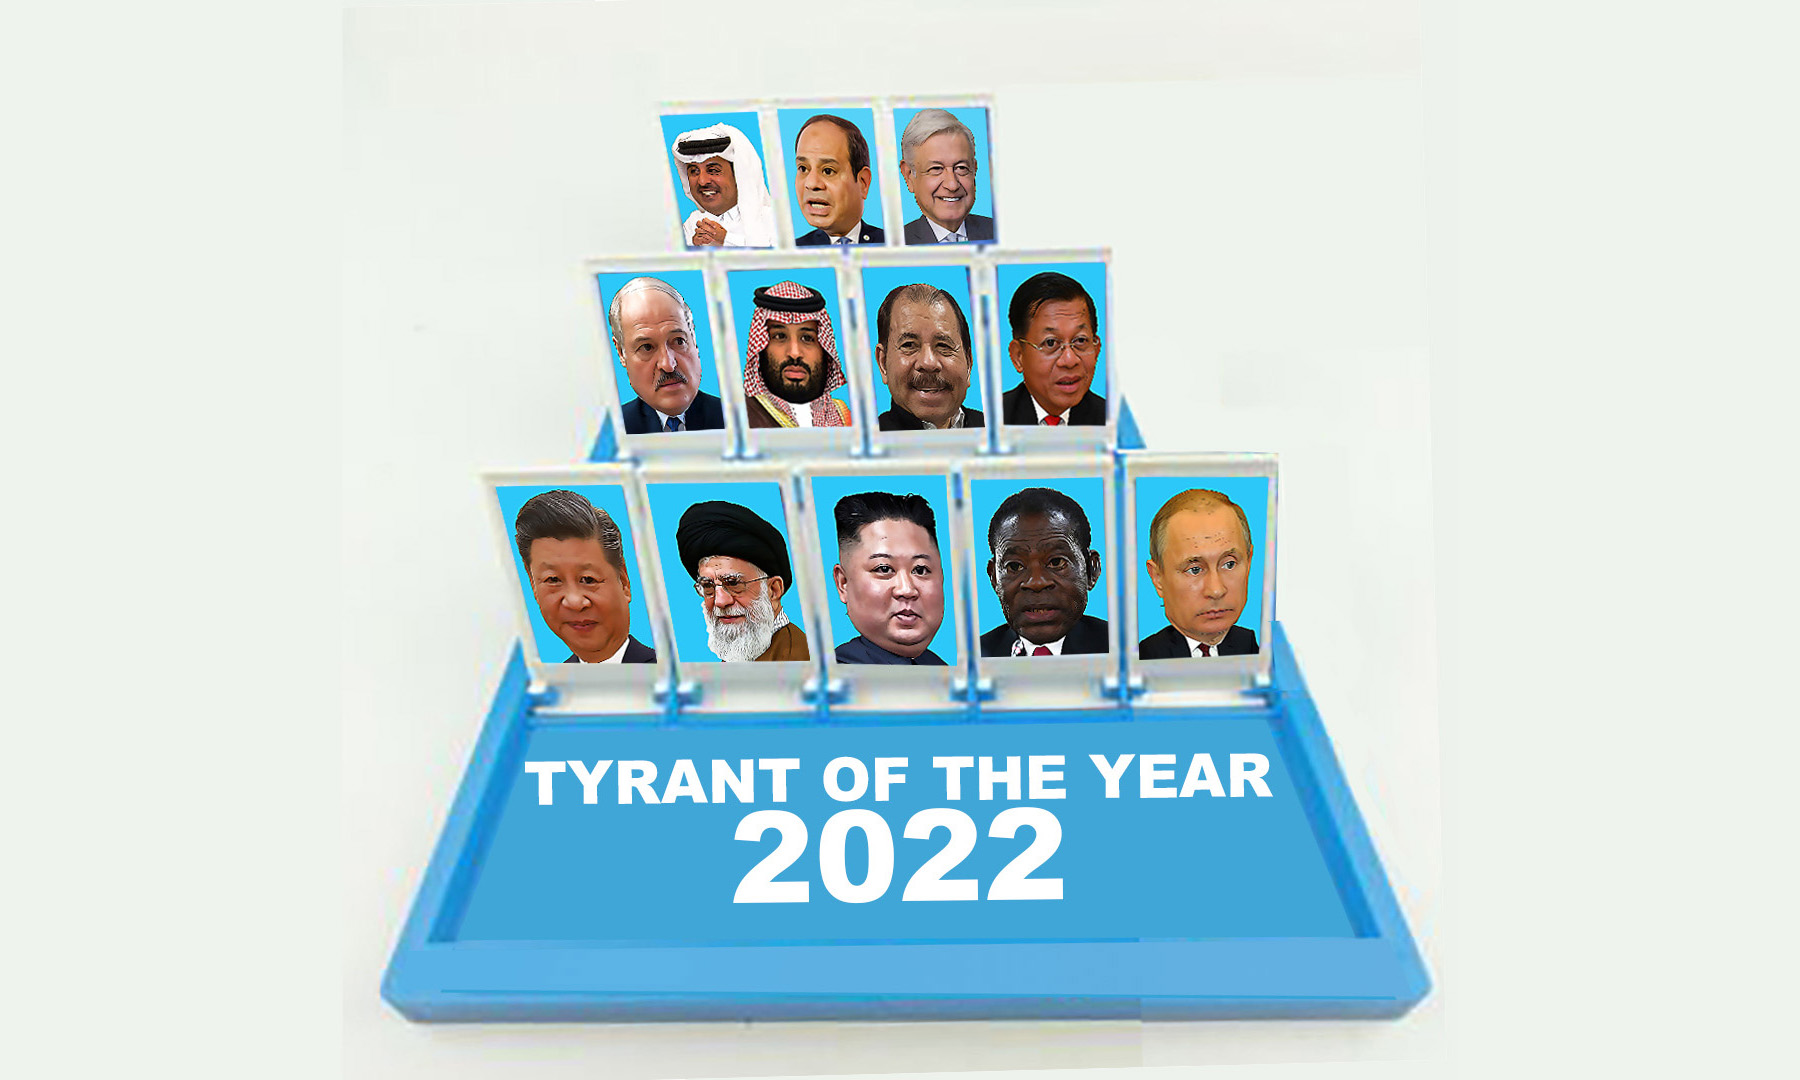 Who is 2022’s Tyrant of the Year?